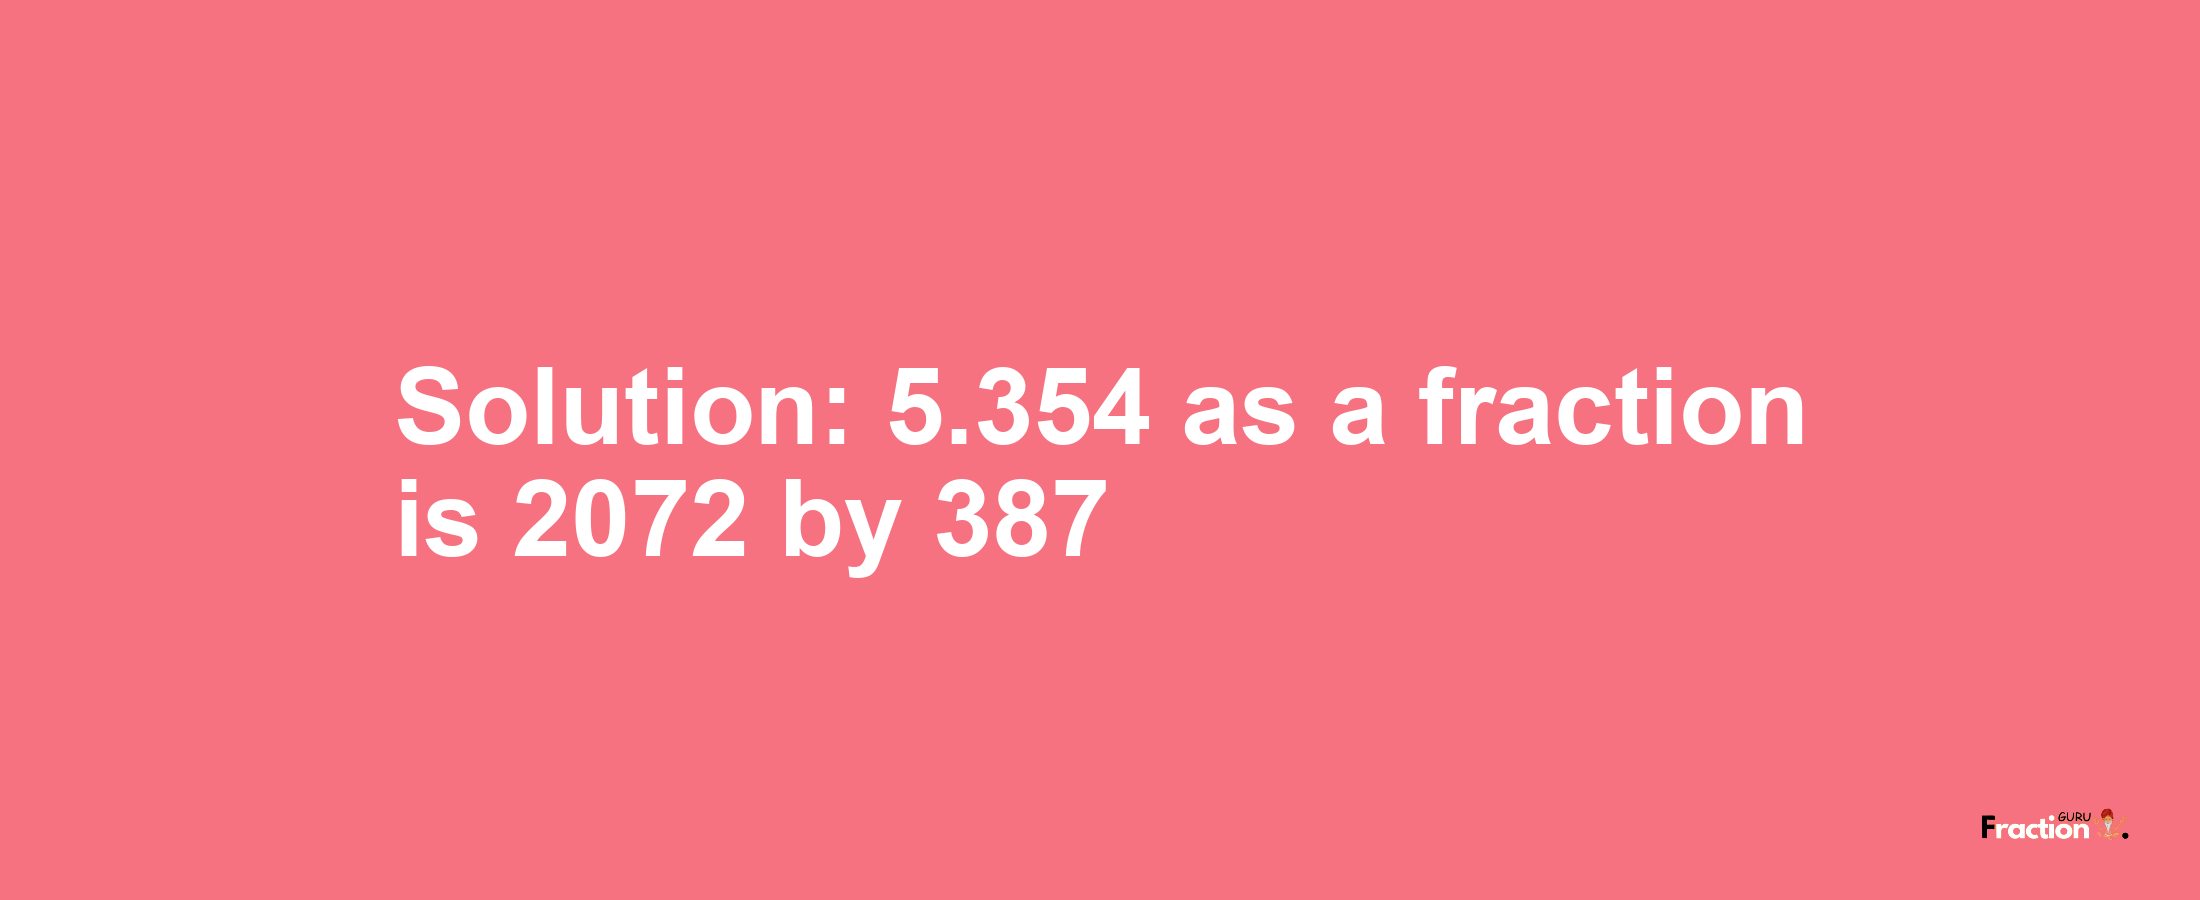 Solution:5.354 as a fraction is 2072/387